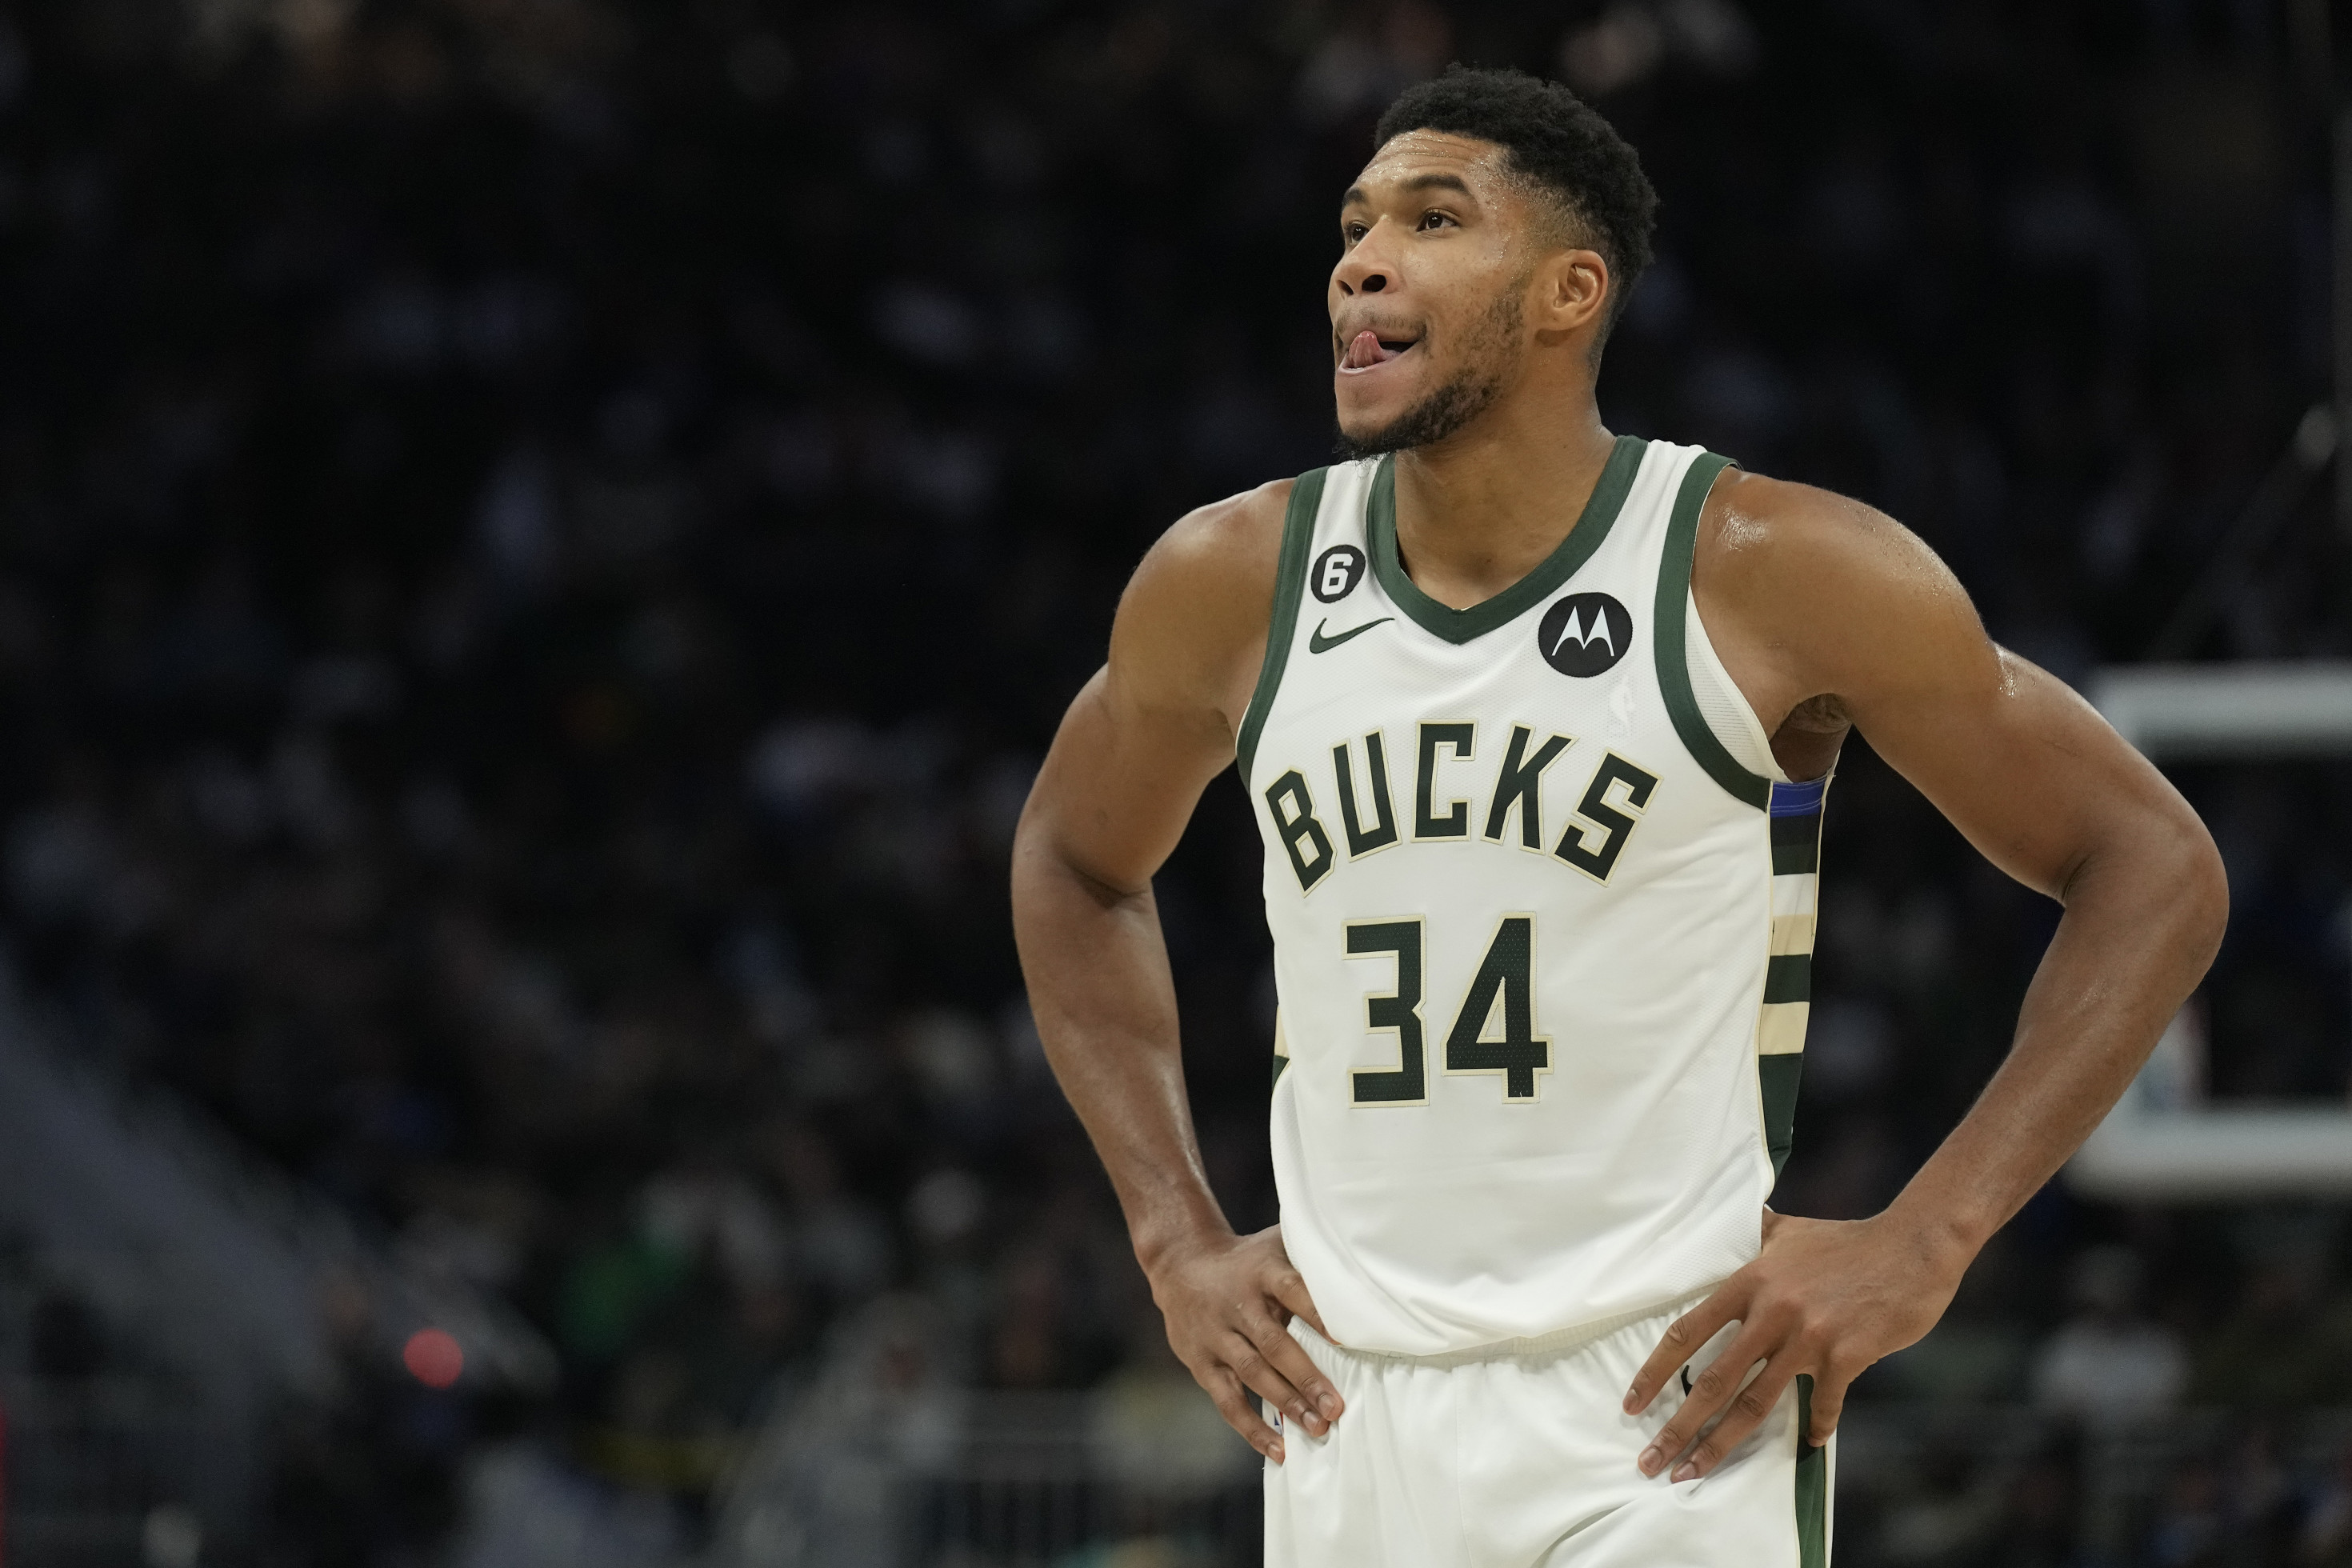 NBA Injury Report: LeBron James out, Giannis Antetokounmpo still out and  more updates on Anthony Davis and Paolo Banchero